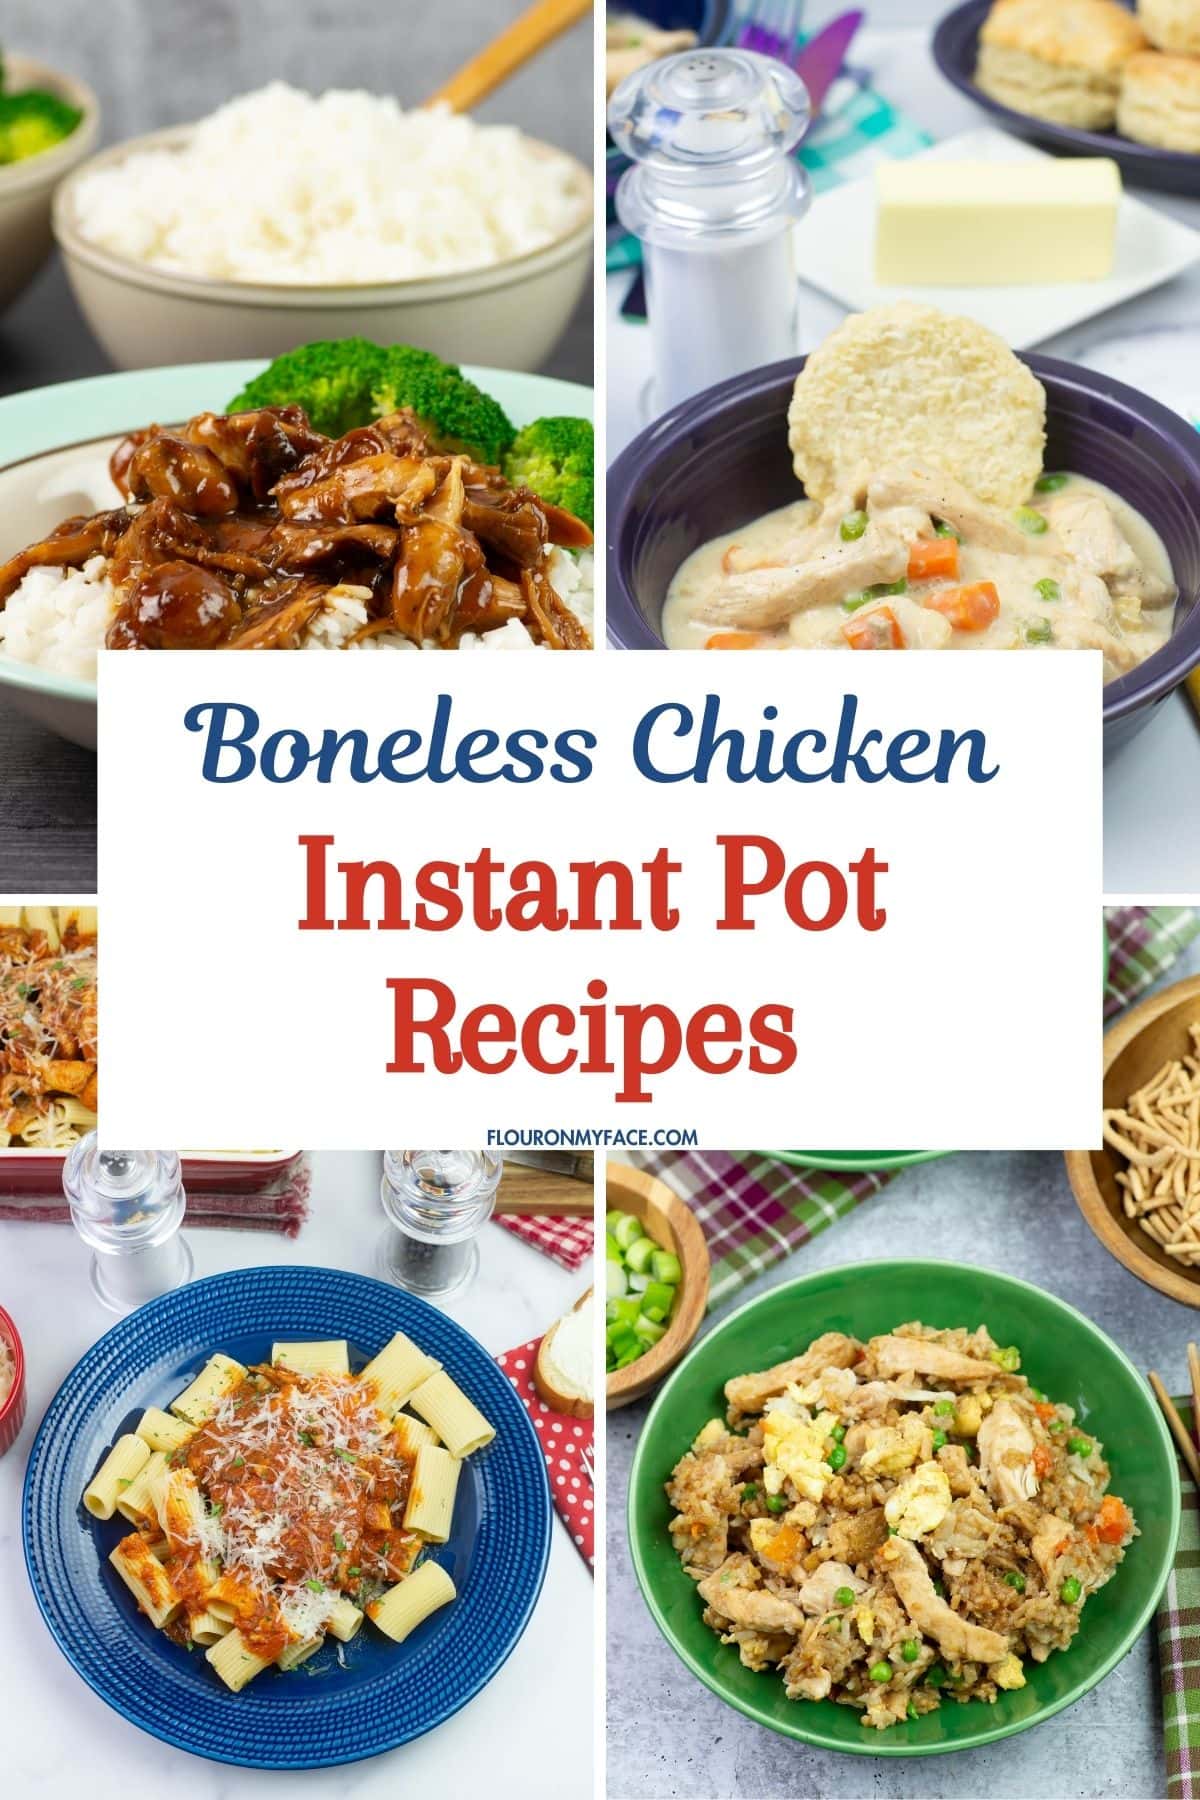 Large collage image with 4 preview photos of boneless chicken instant pot recipes.